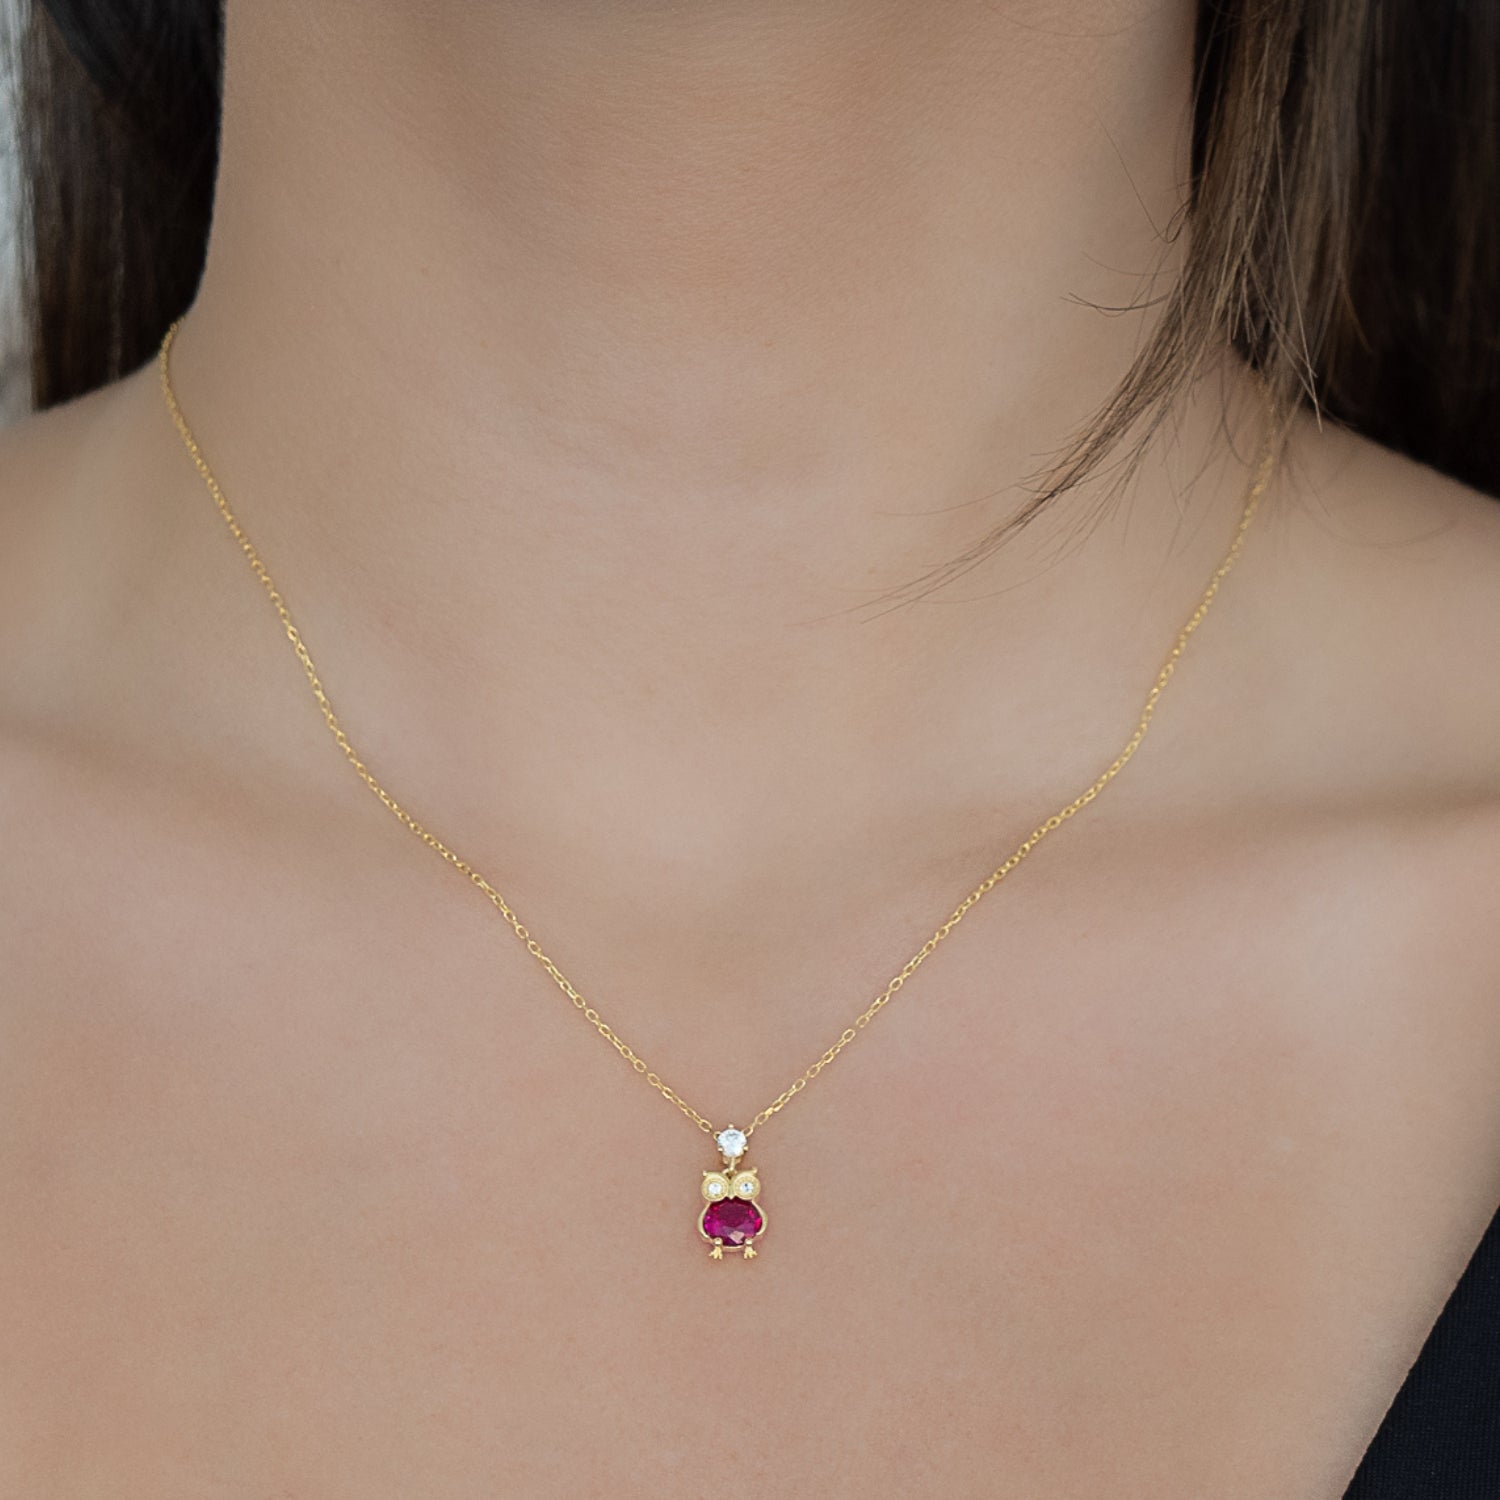 A model wearing the Ruby Owl Necklace, showcasing its elegance and sophistication as it gracefully adorns their neckline.